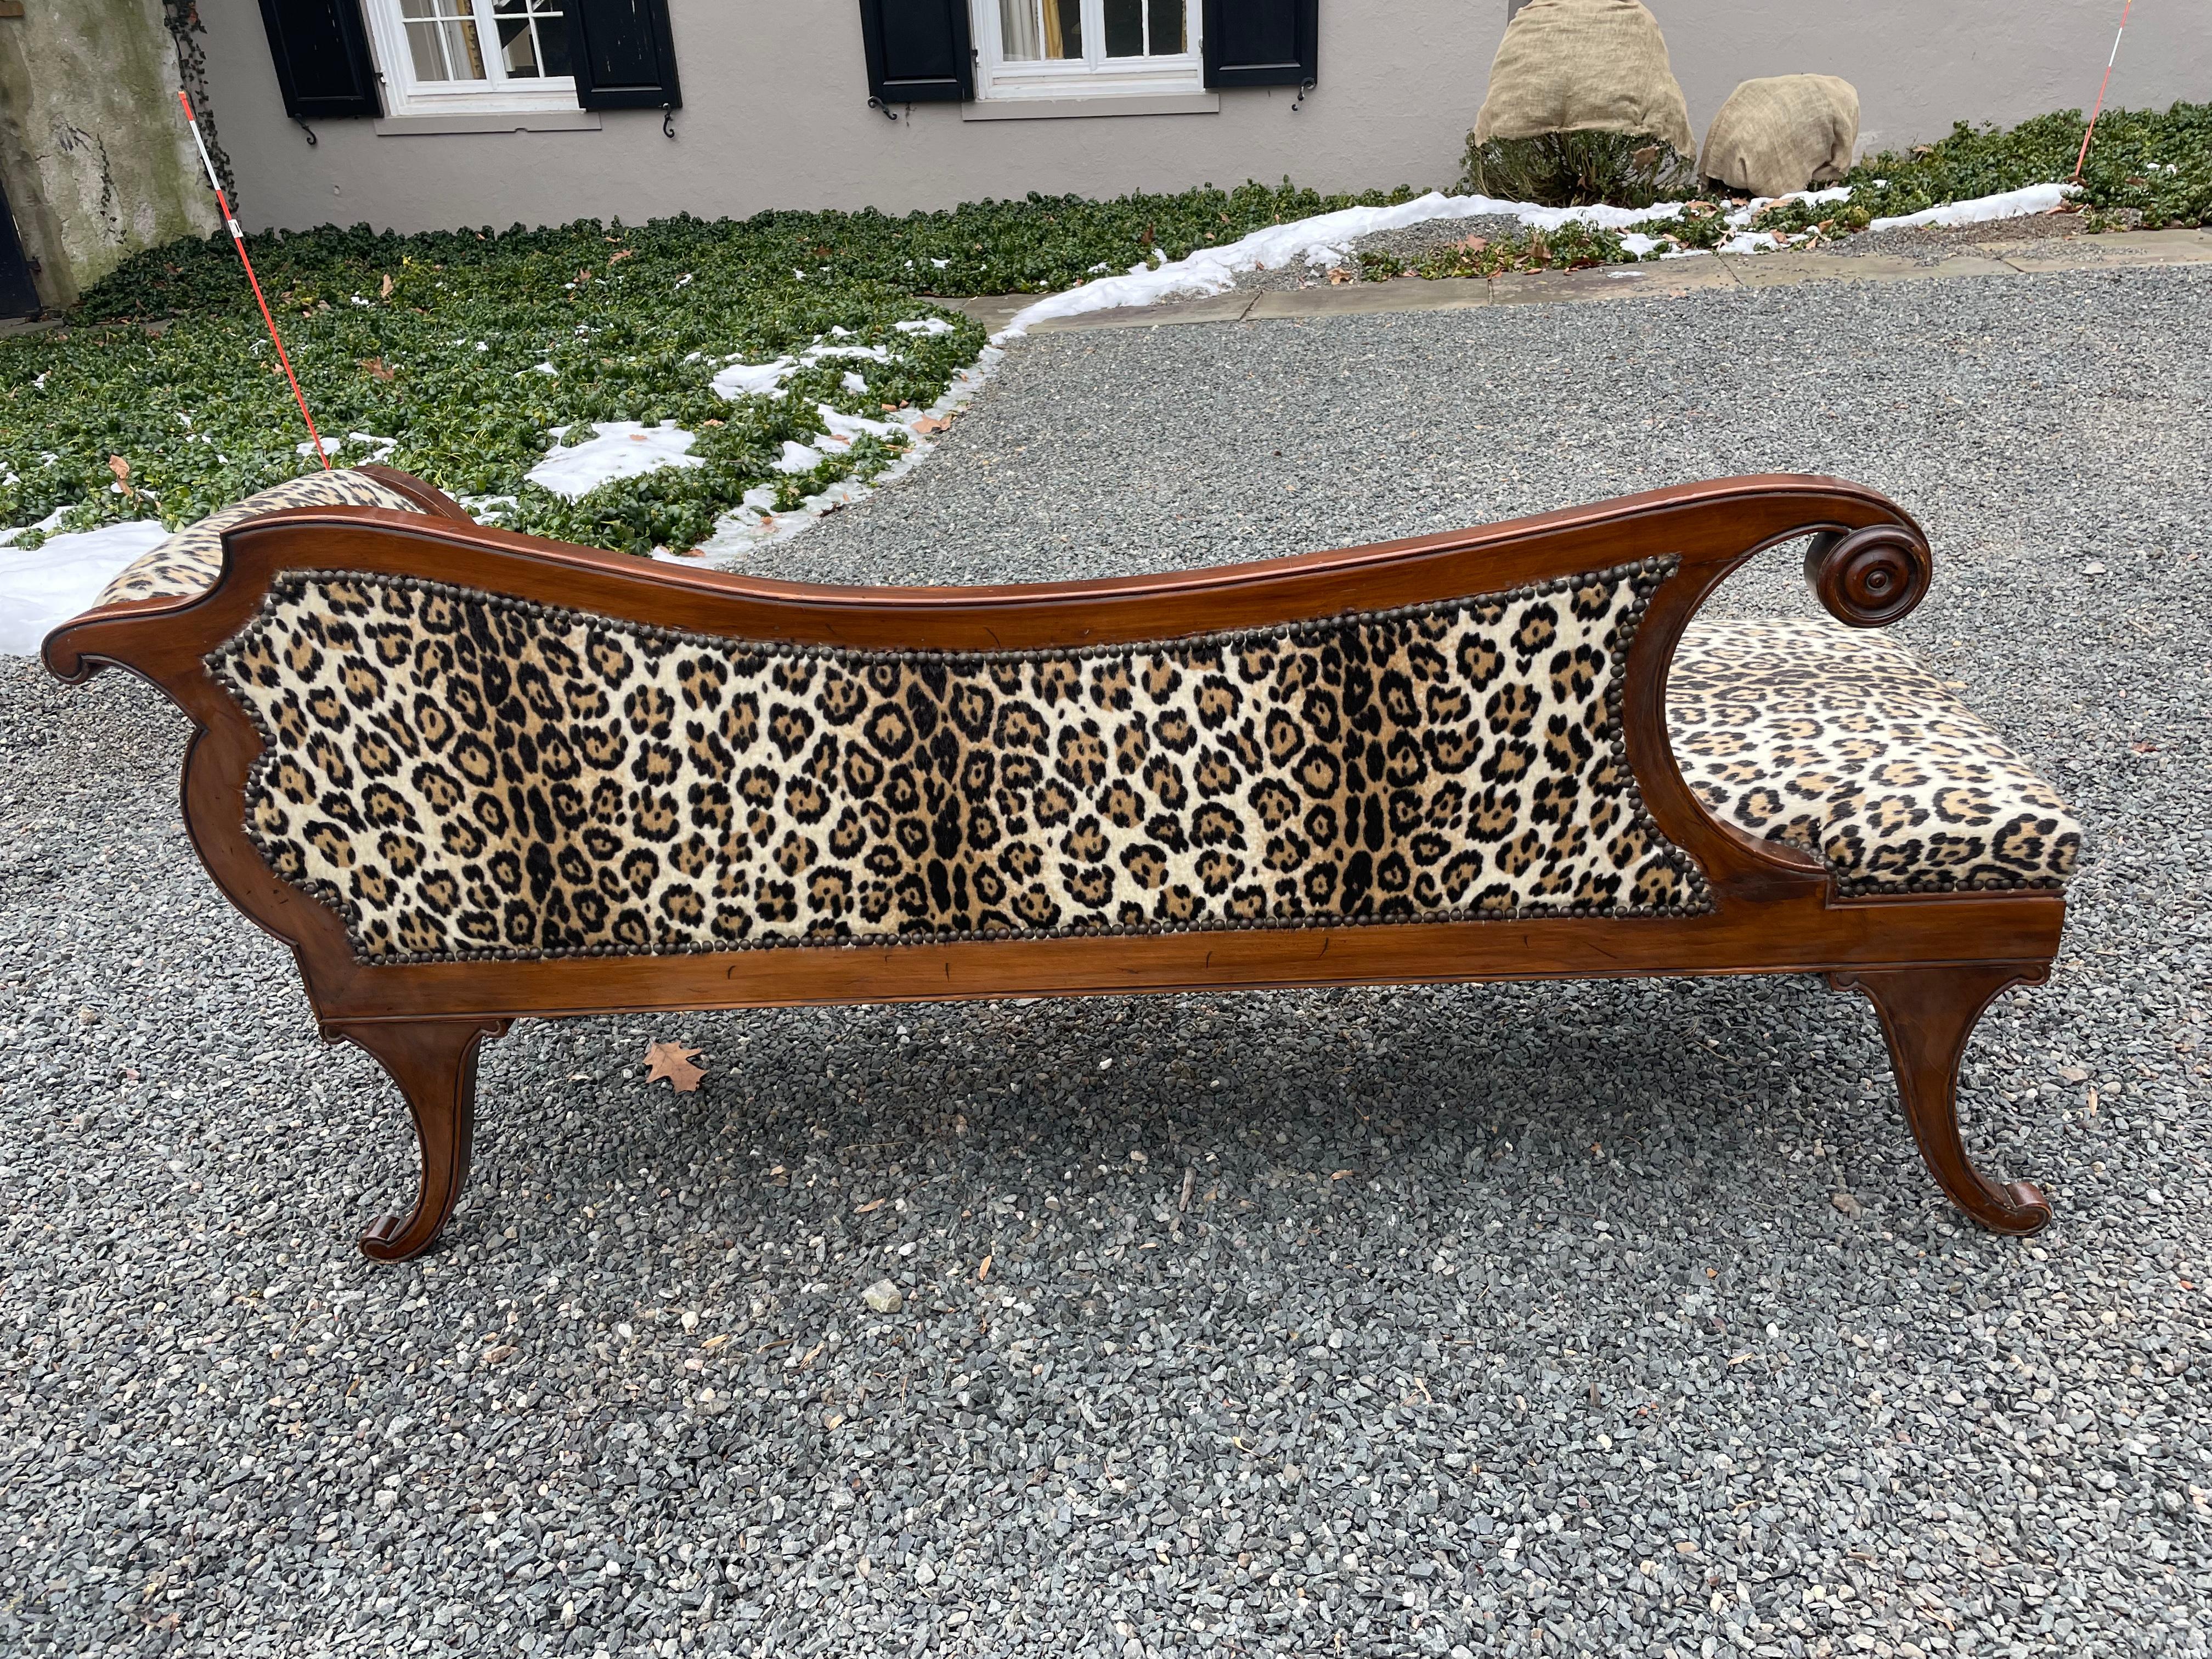 Super Glam Regency Style Faux Leopard Upholstered Chaise Lounge 1